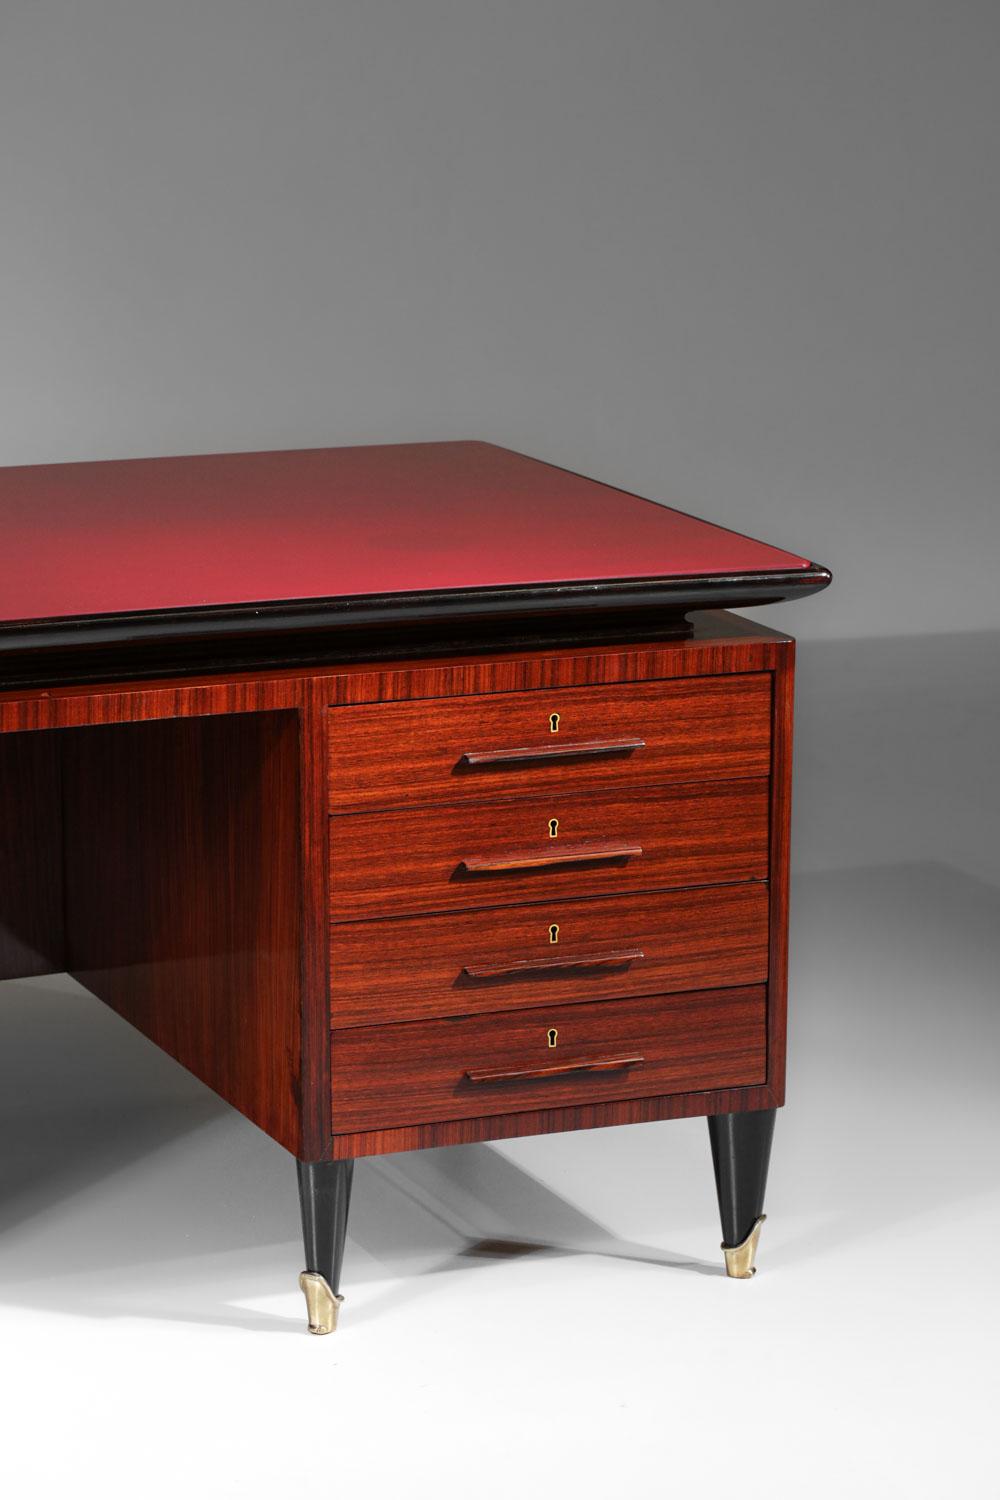 Italian large Desk by Vittorio Dassi solid wood and glass 60s - G725 For Sale 1